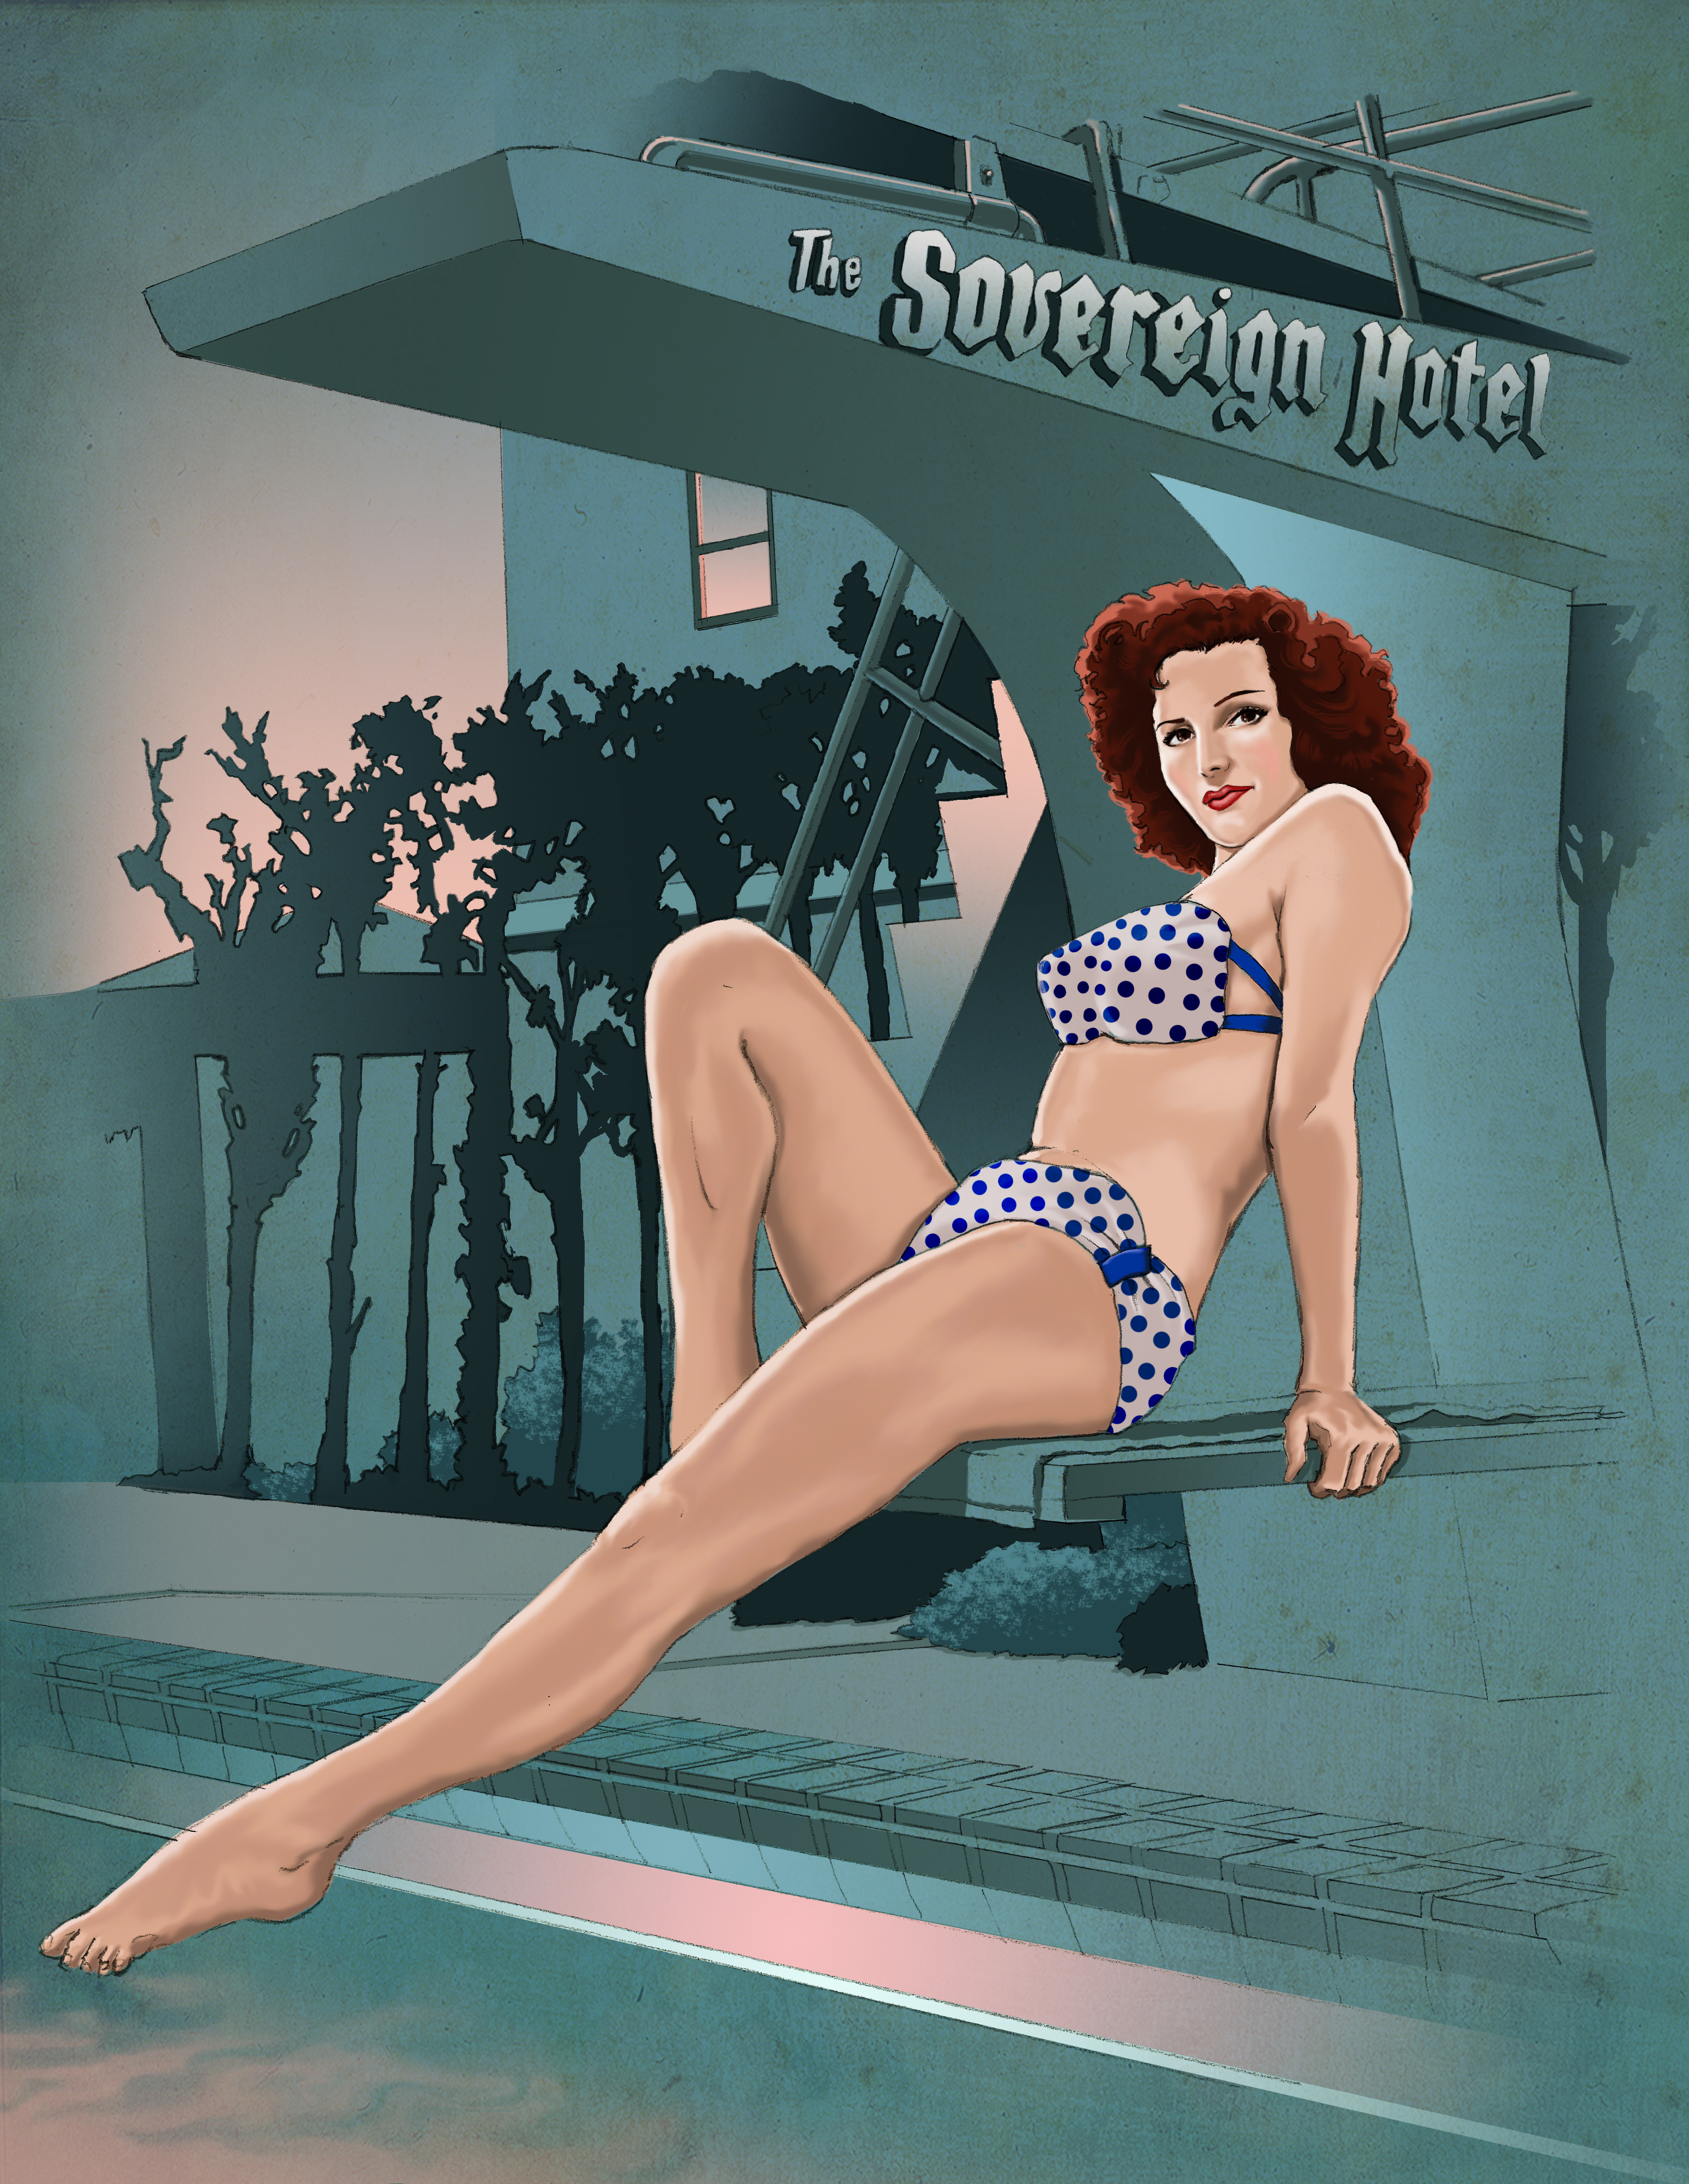 Girl perched on the diving board at the Sovereign Hotel. Painted in Photoshop, with pencil drawing.